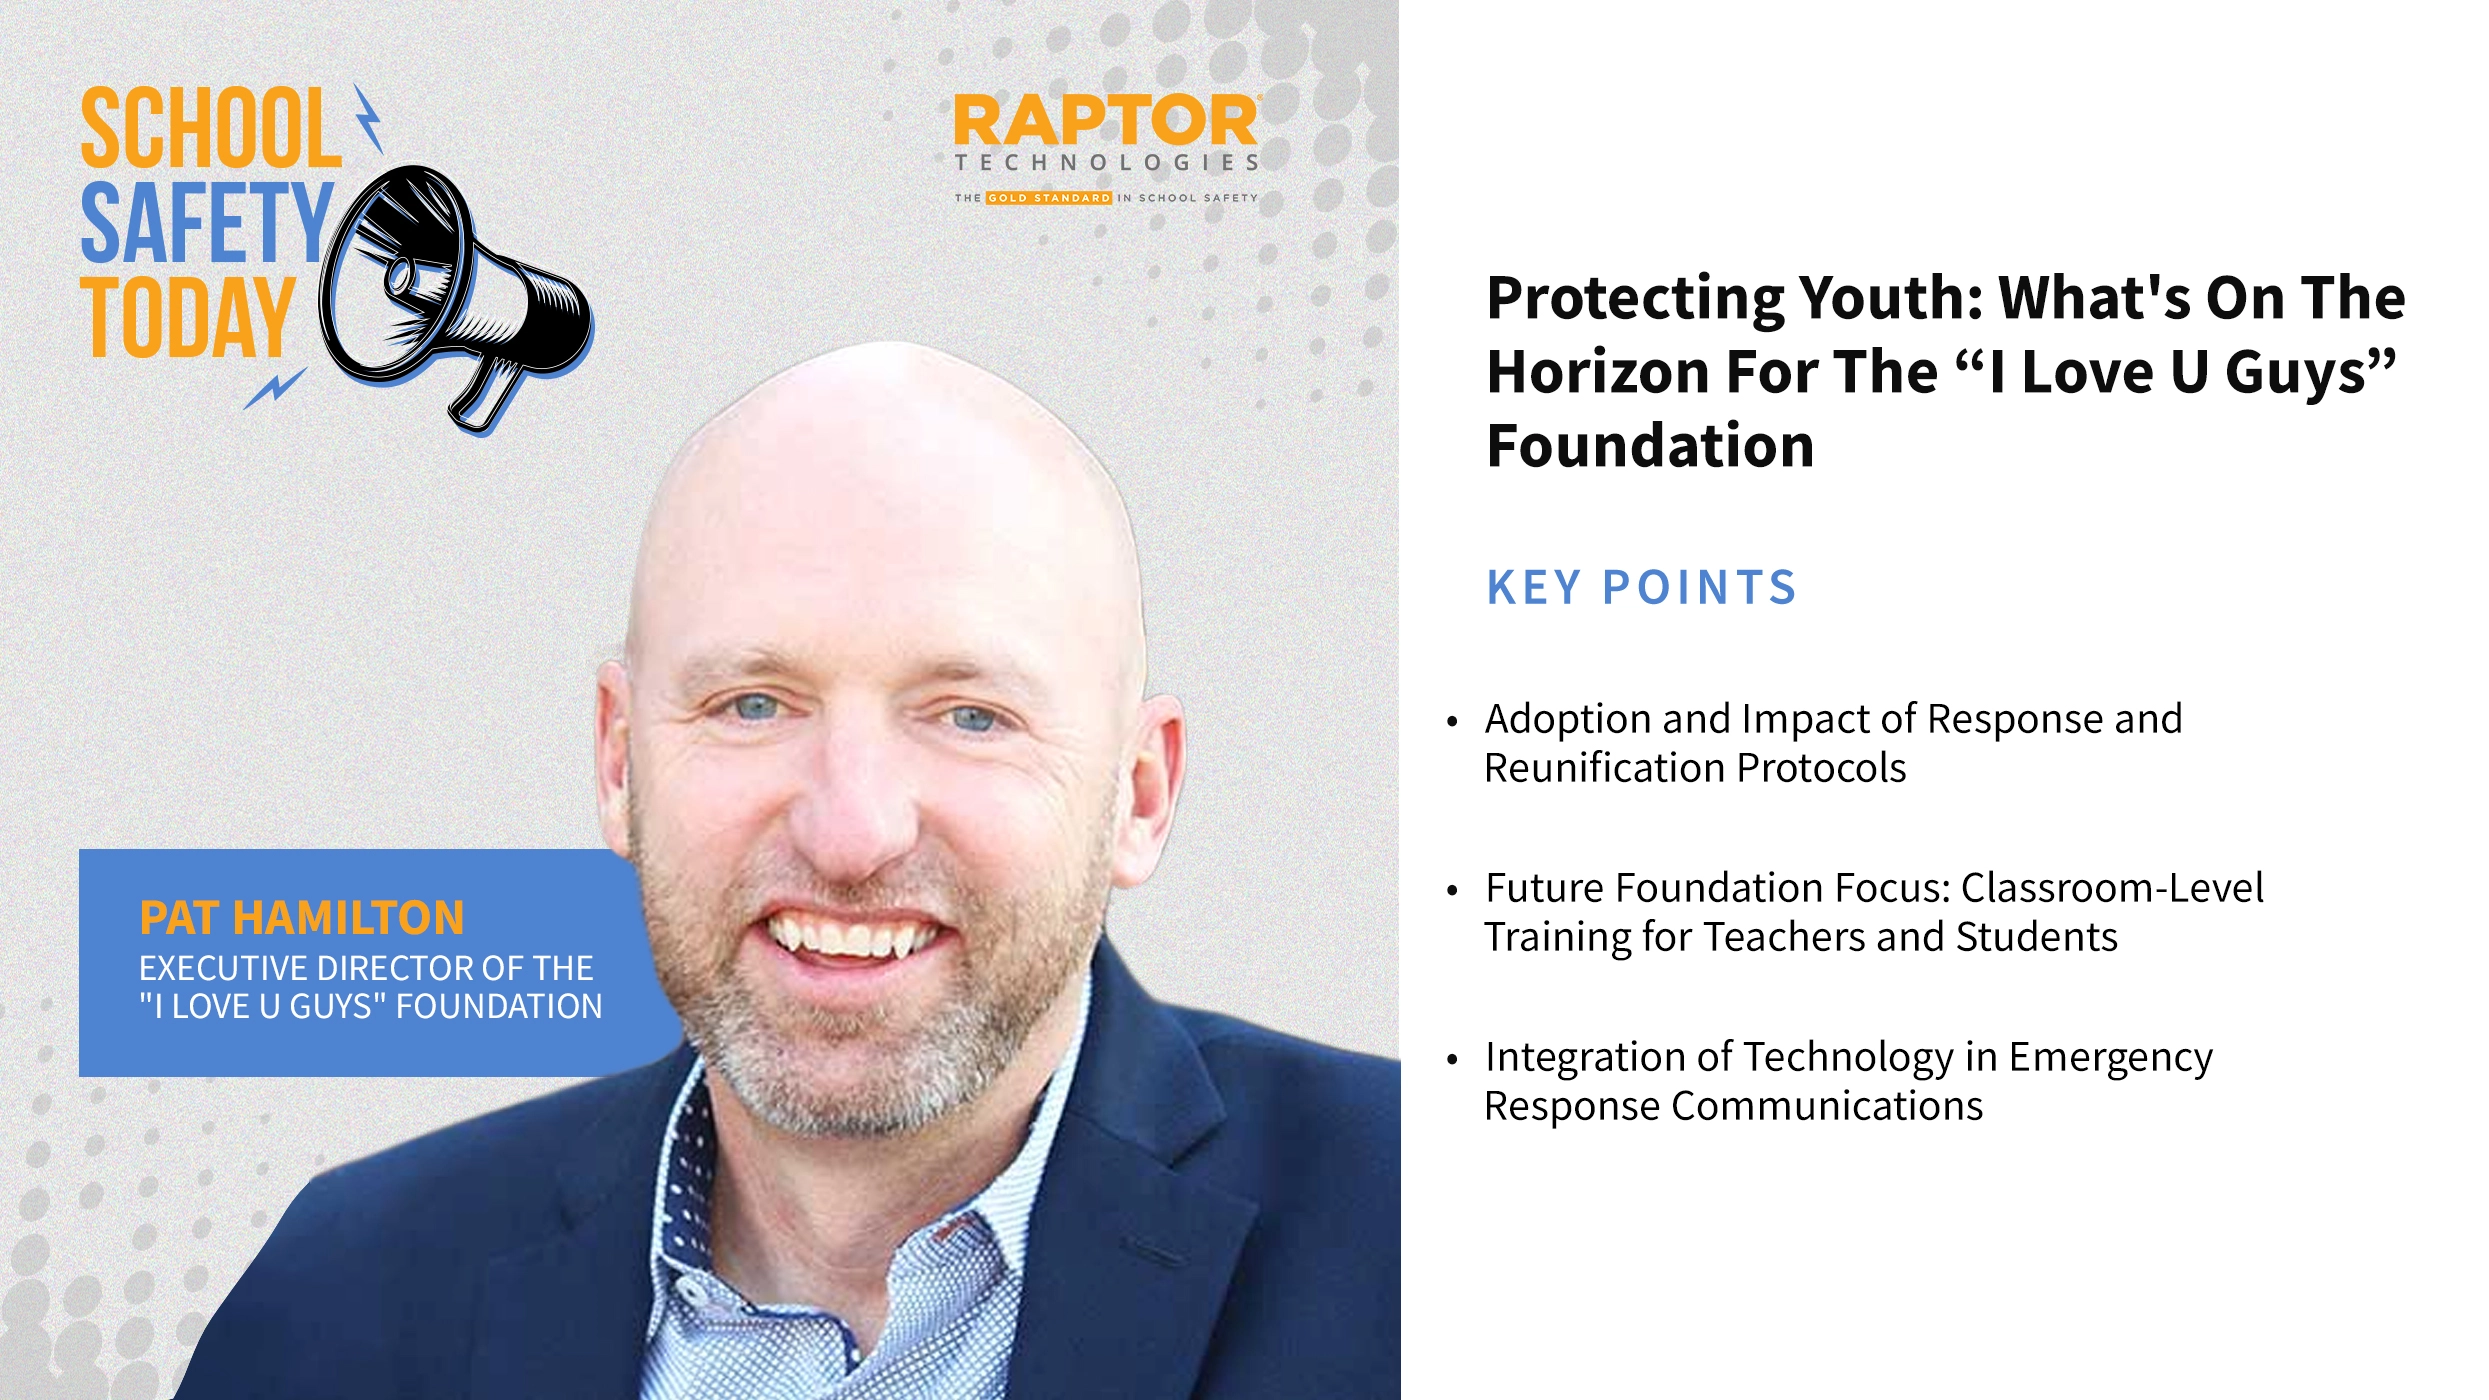 Protecting Youth: What’s on the Horizon for The “I Love U Guys” Foundation